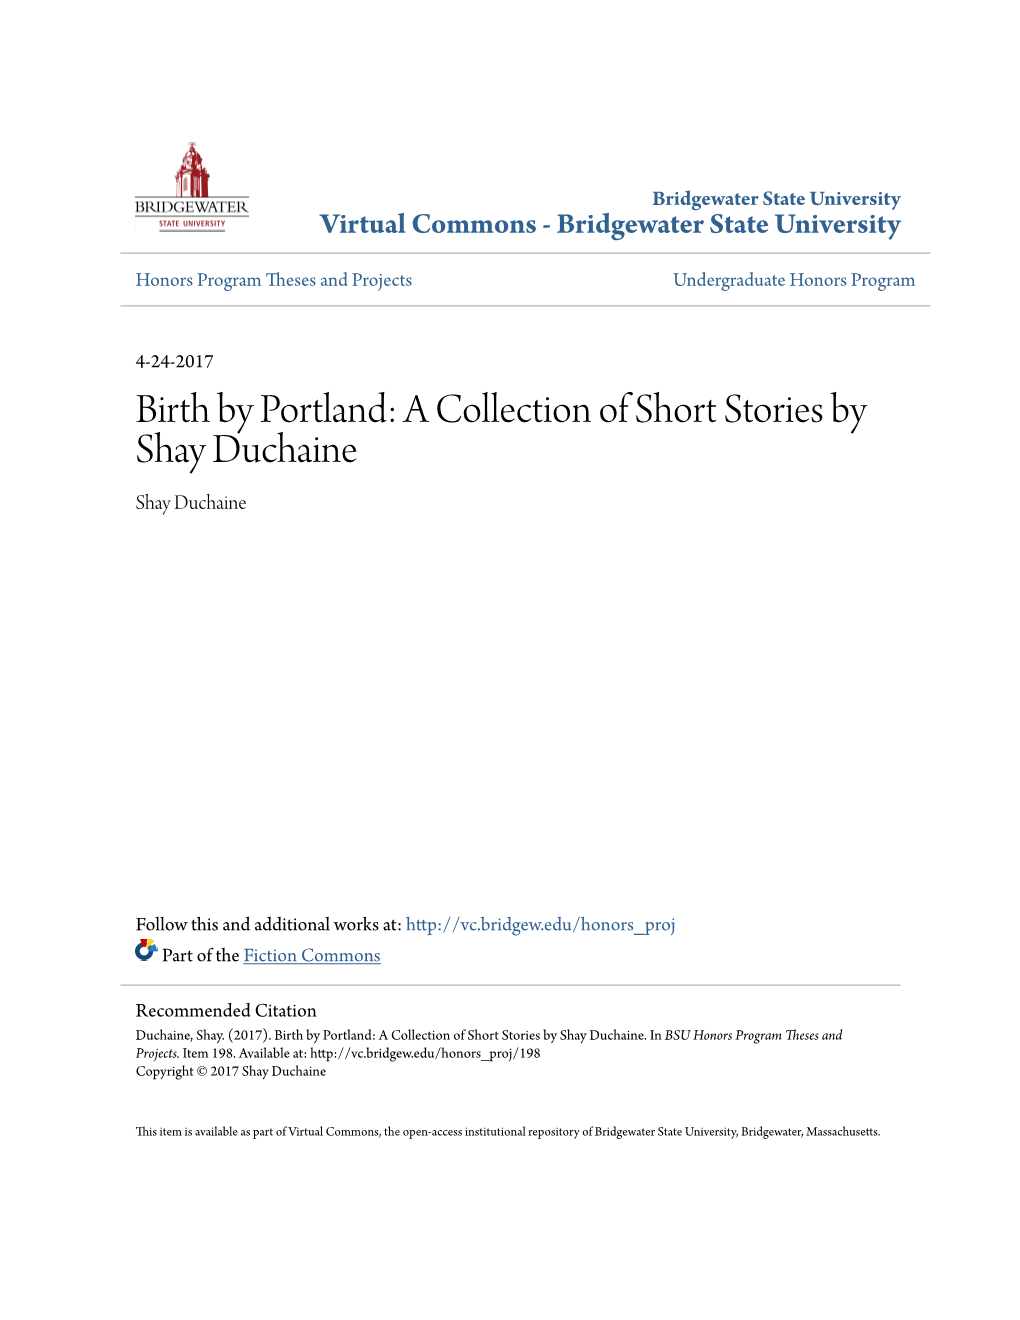 A Collection of Short Stories by Shay Duchaine Shay Duchaine